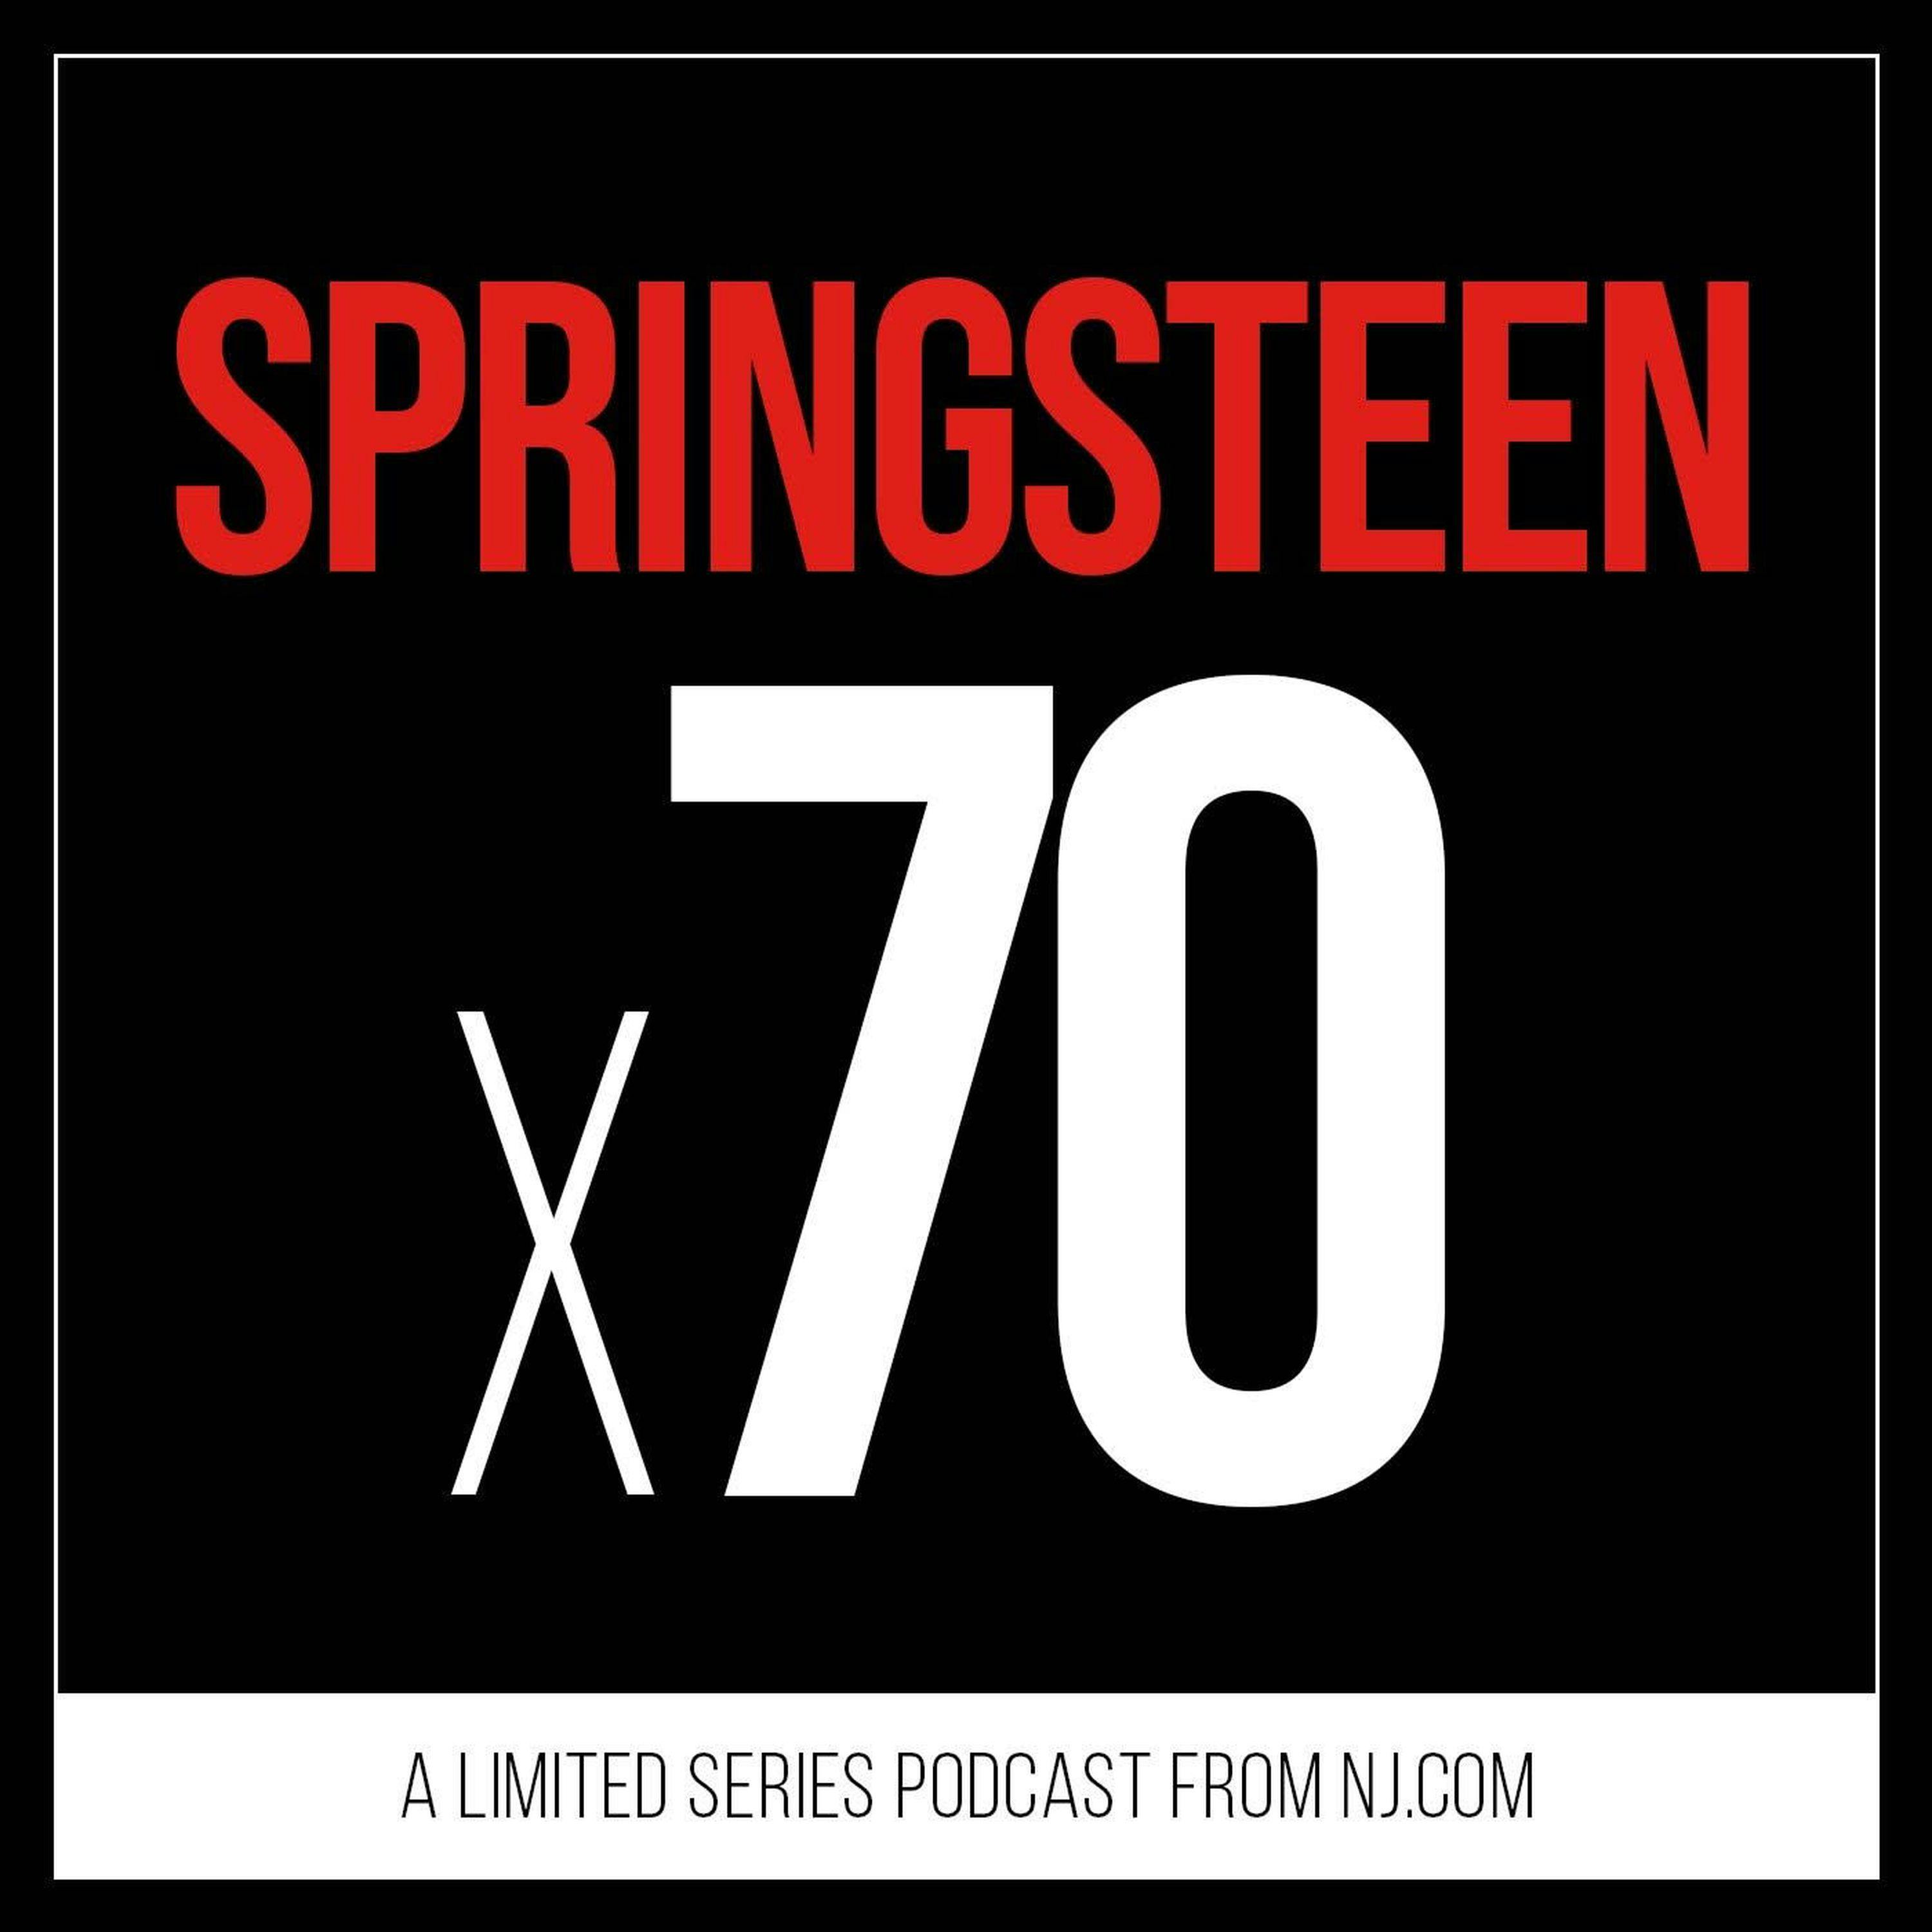 Coming Aug. 12: Welcome to Springsteen x 70